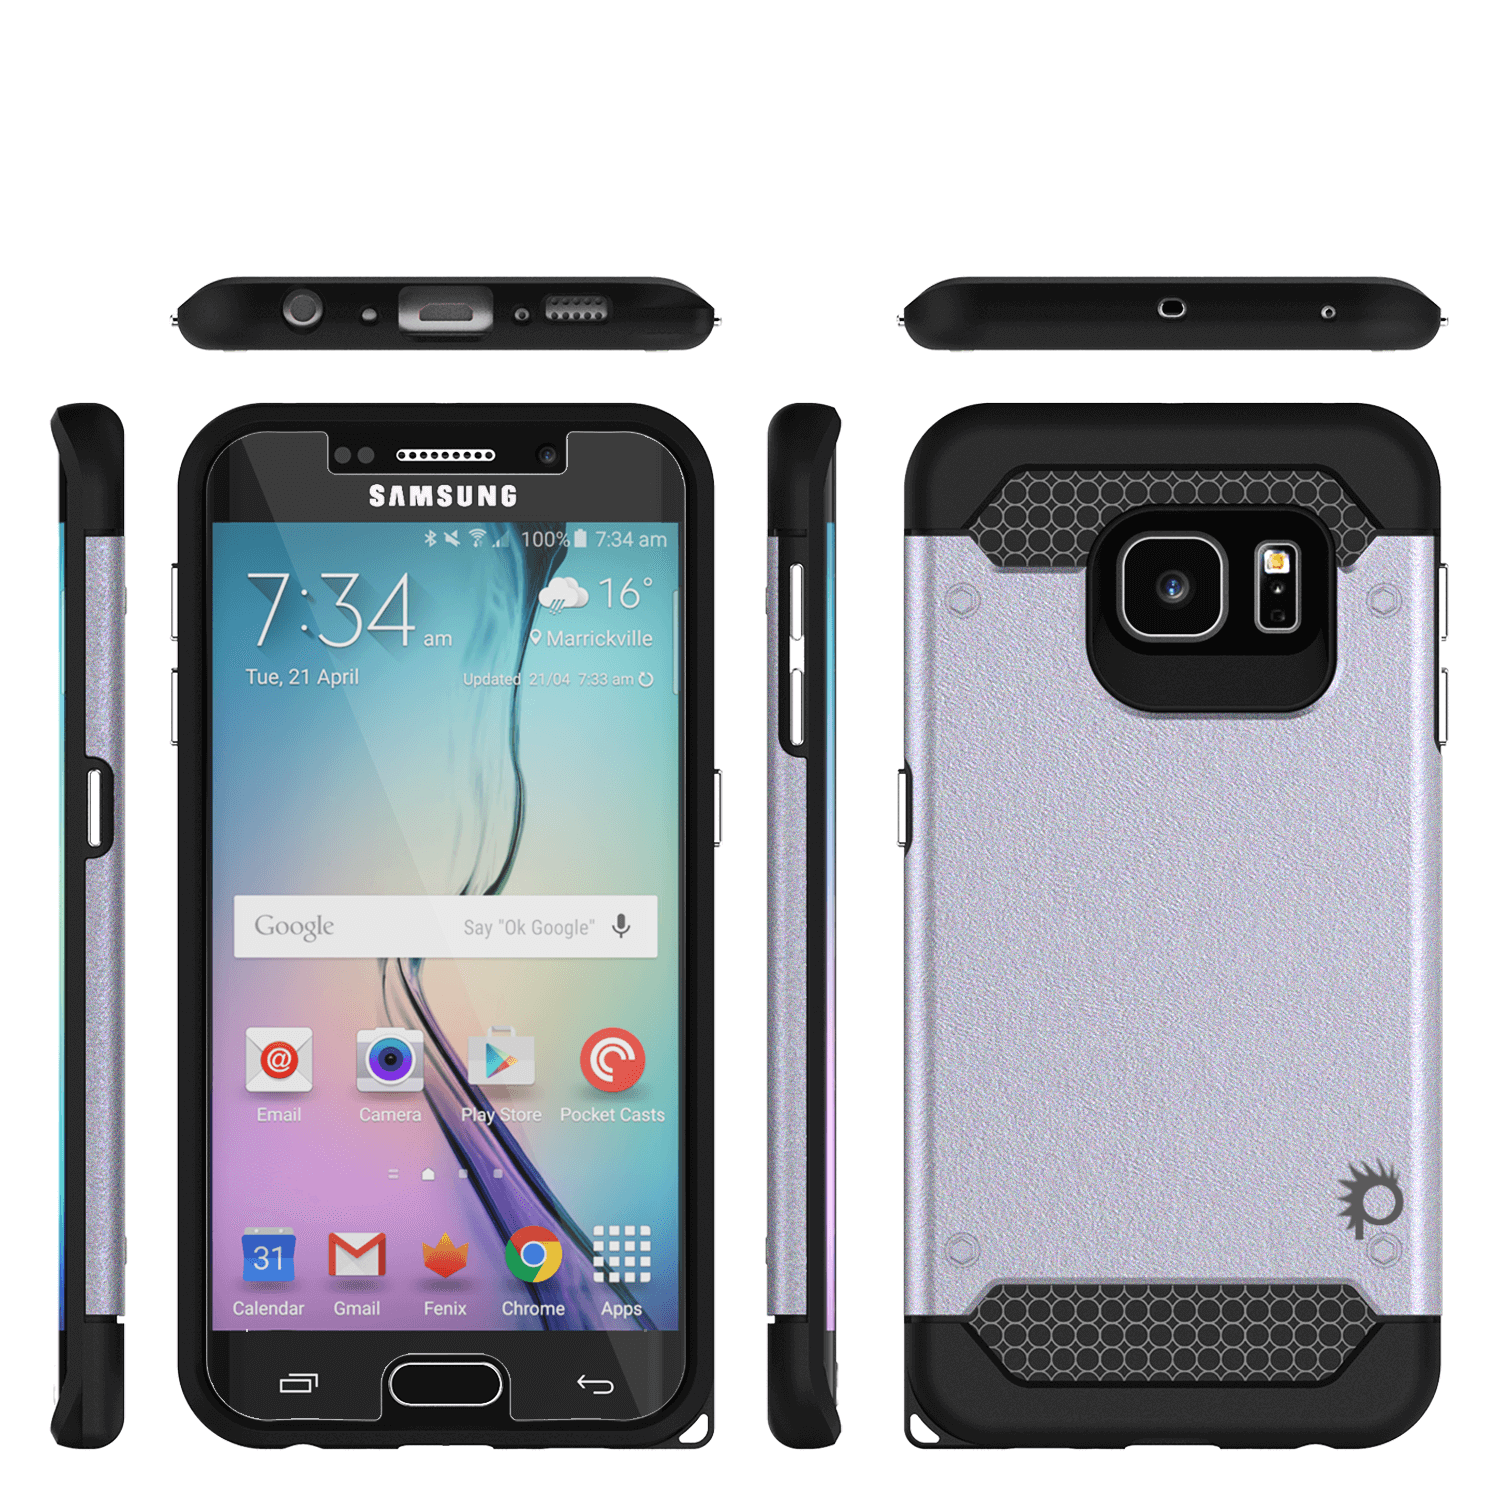 Galaxy s6 EDGE Case PunkCase Galactic SIlver Series Slim Armor Soft Cover w/ Screen Protector - PunkCase NZ